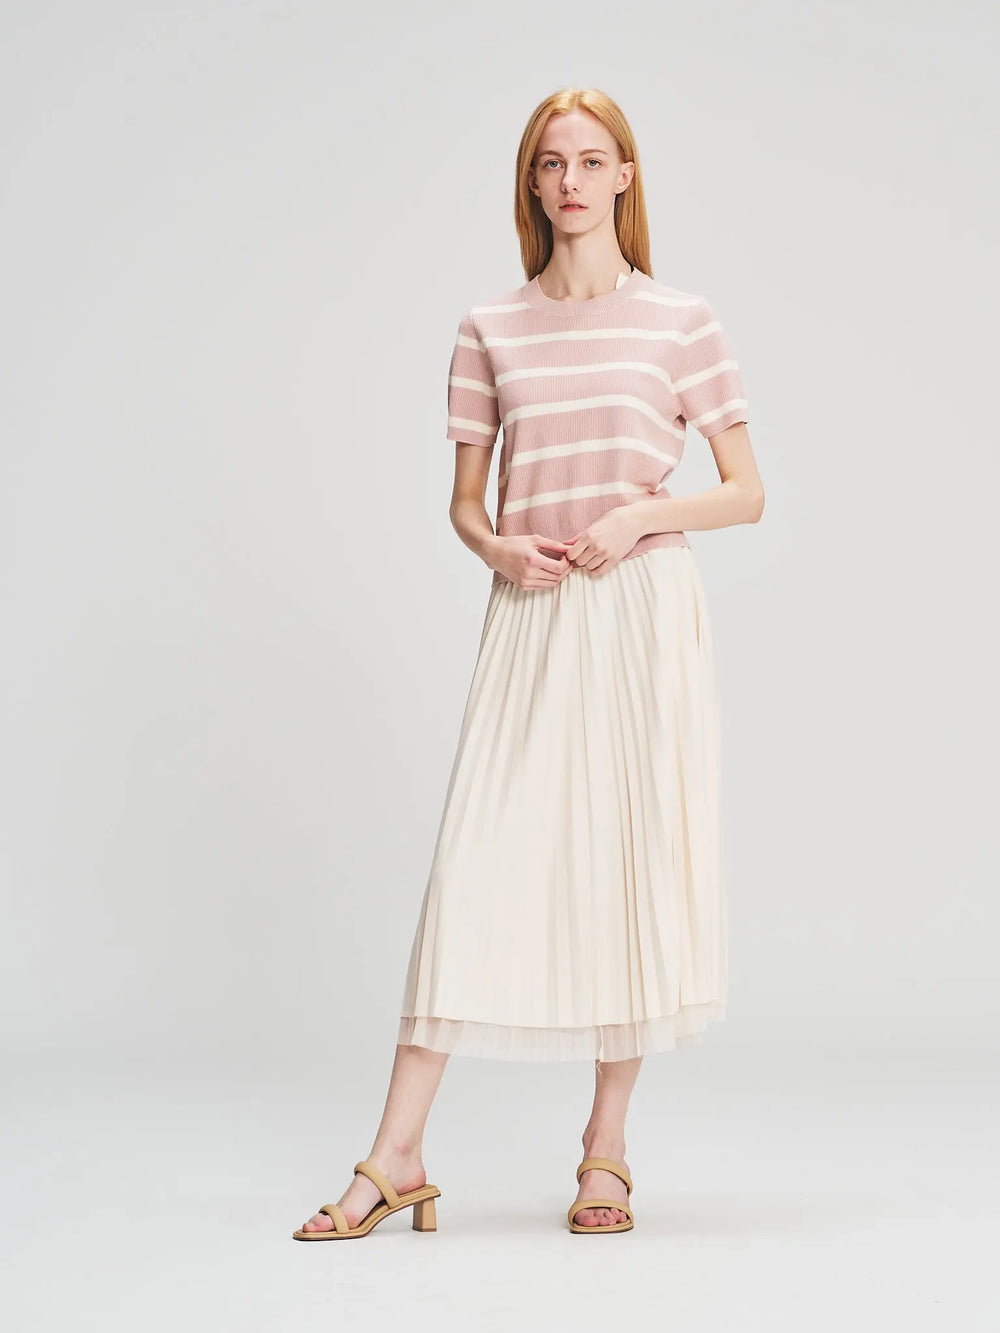 An image of a  Pink-One-Size 25175 Basic Stripe T-Shirt by  Mirra Masa